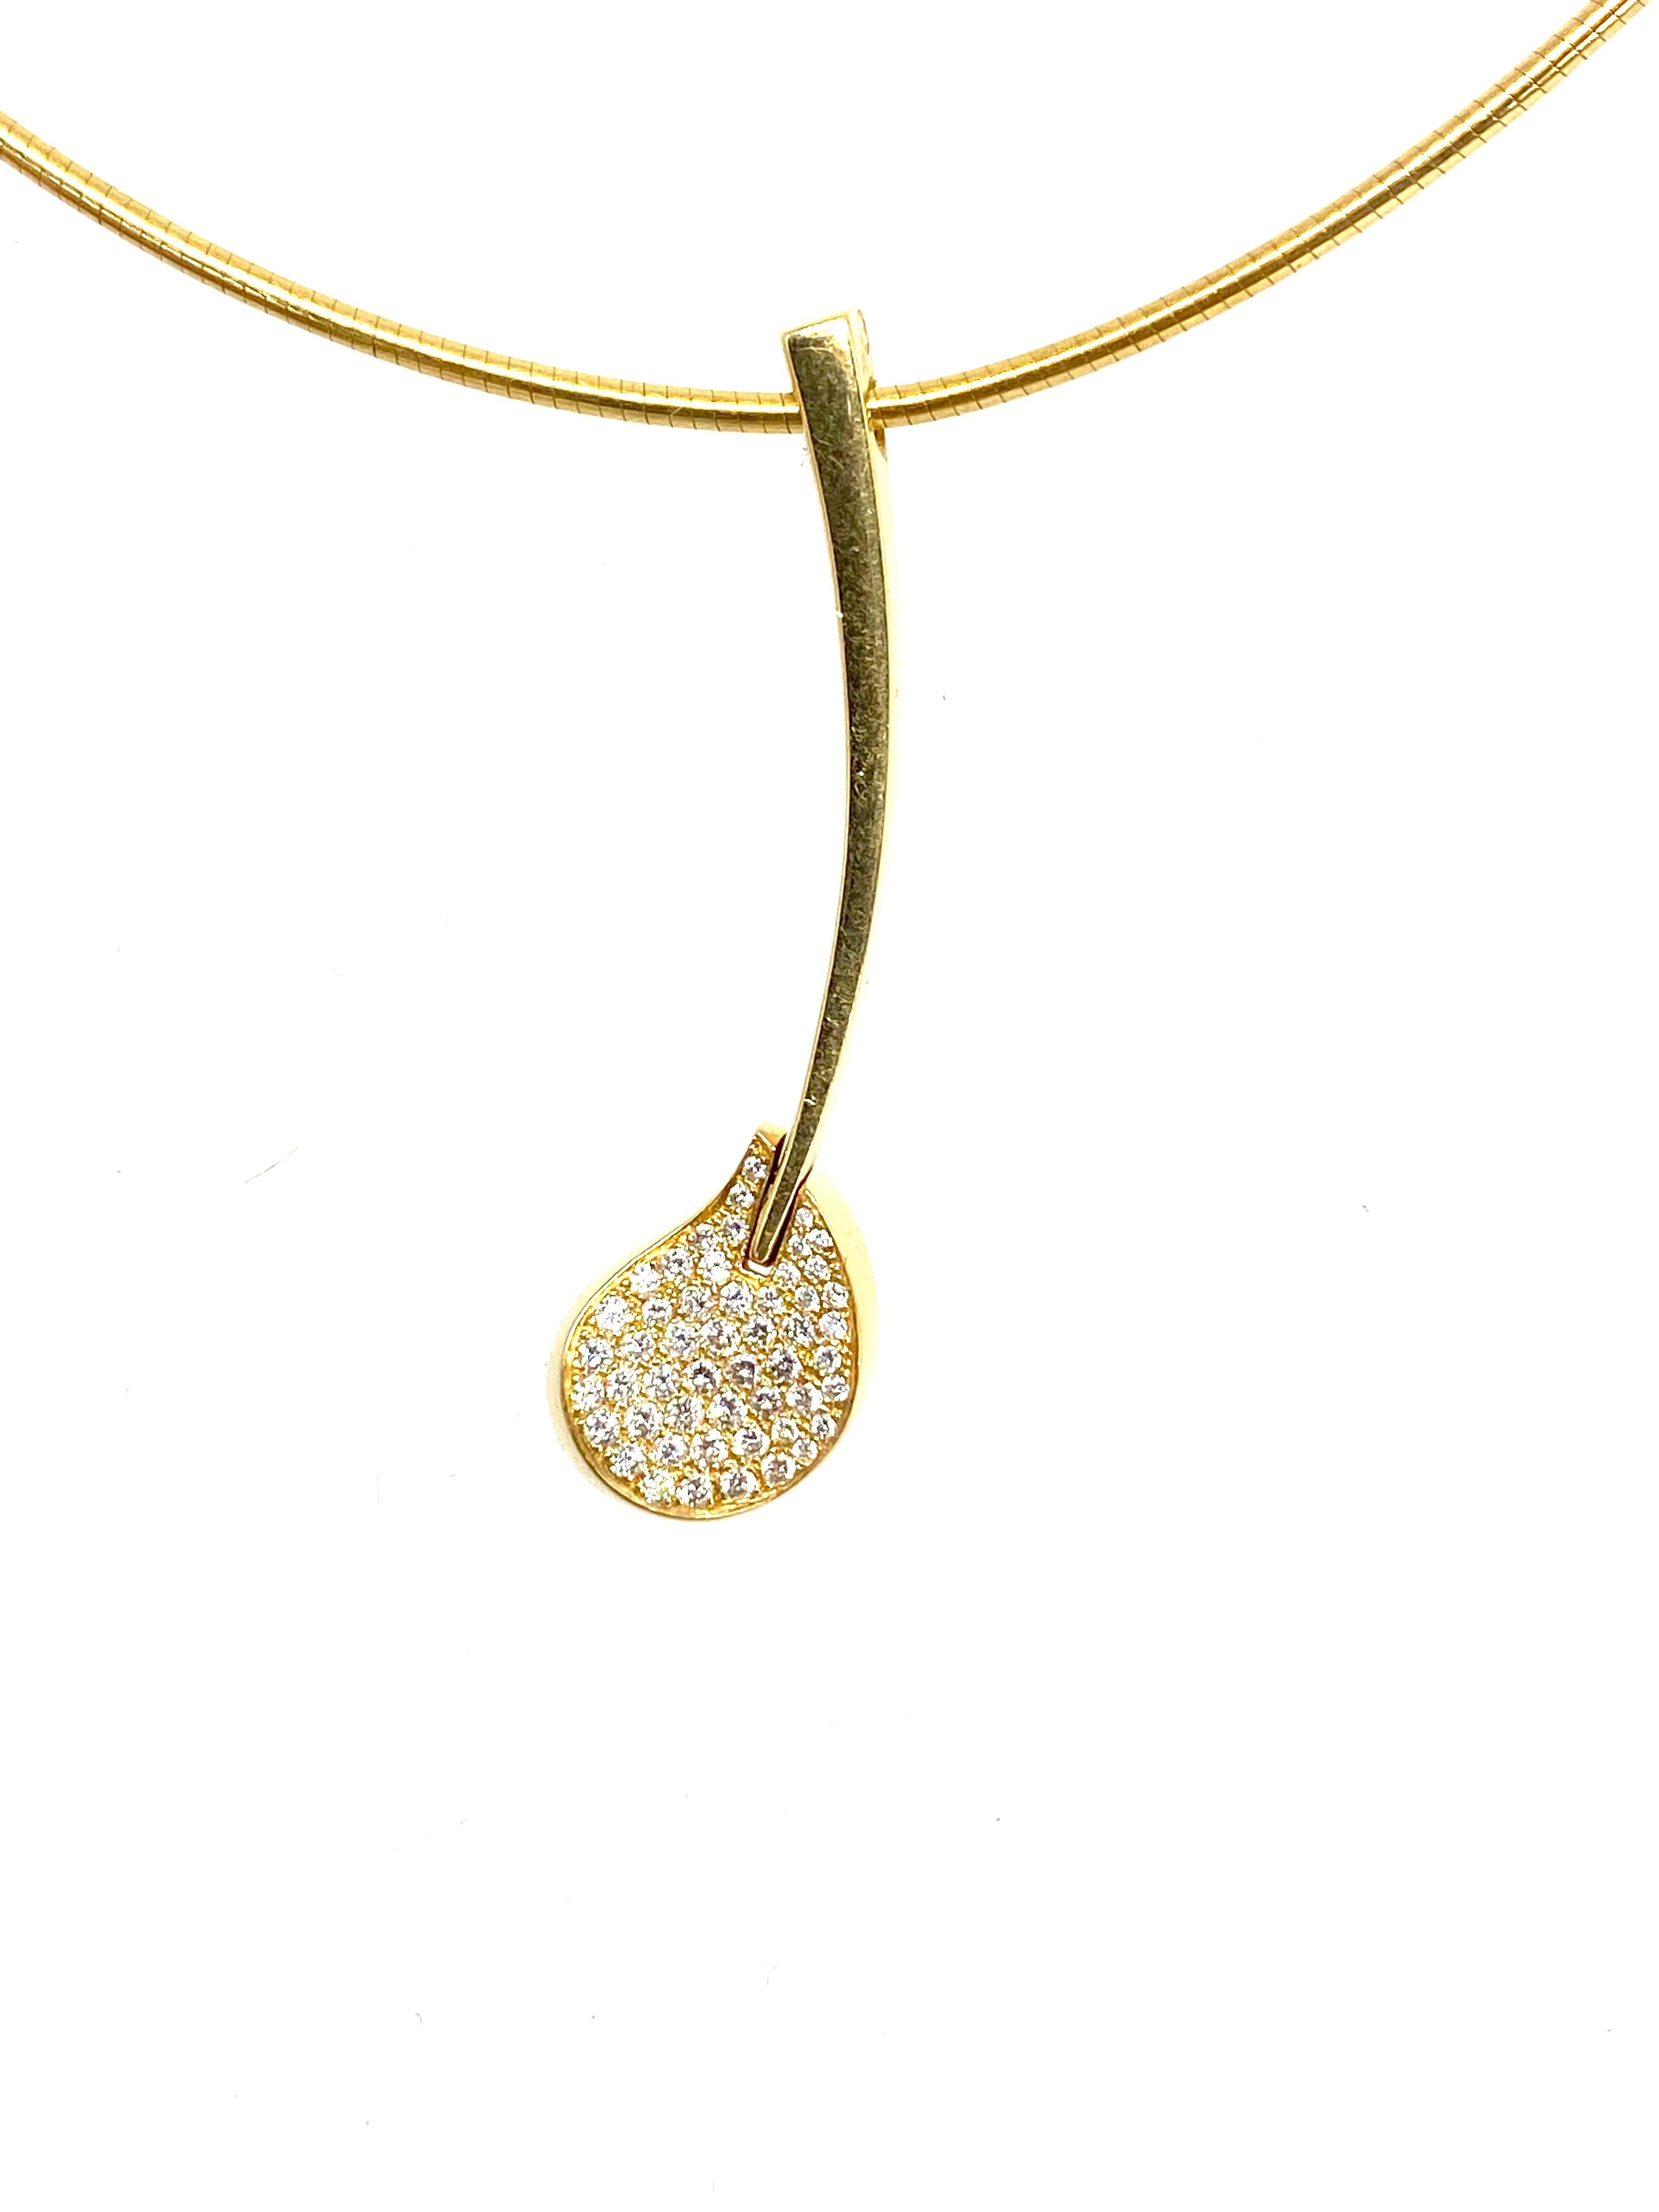 Product details:
18K yellow gold.
The necklace is 1.10ct round brilliant cut diamond E-F/ VVS1; the necklace is 16